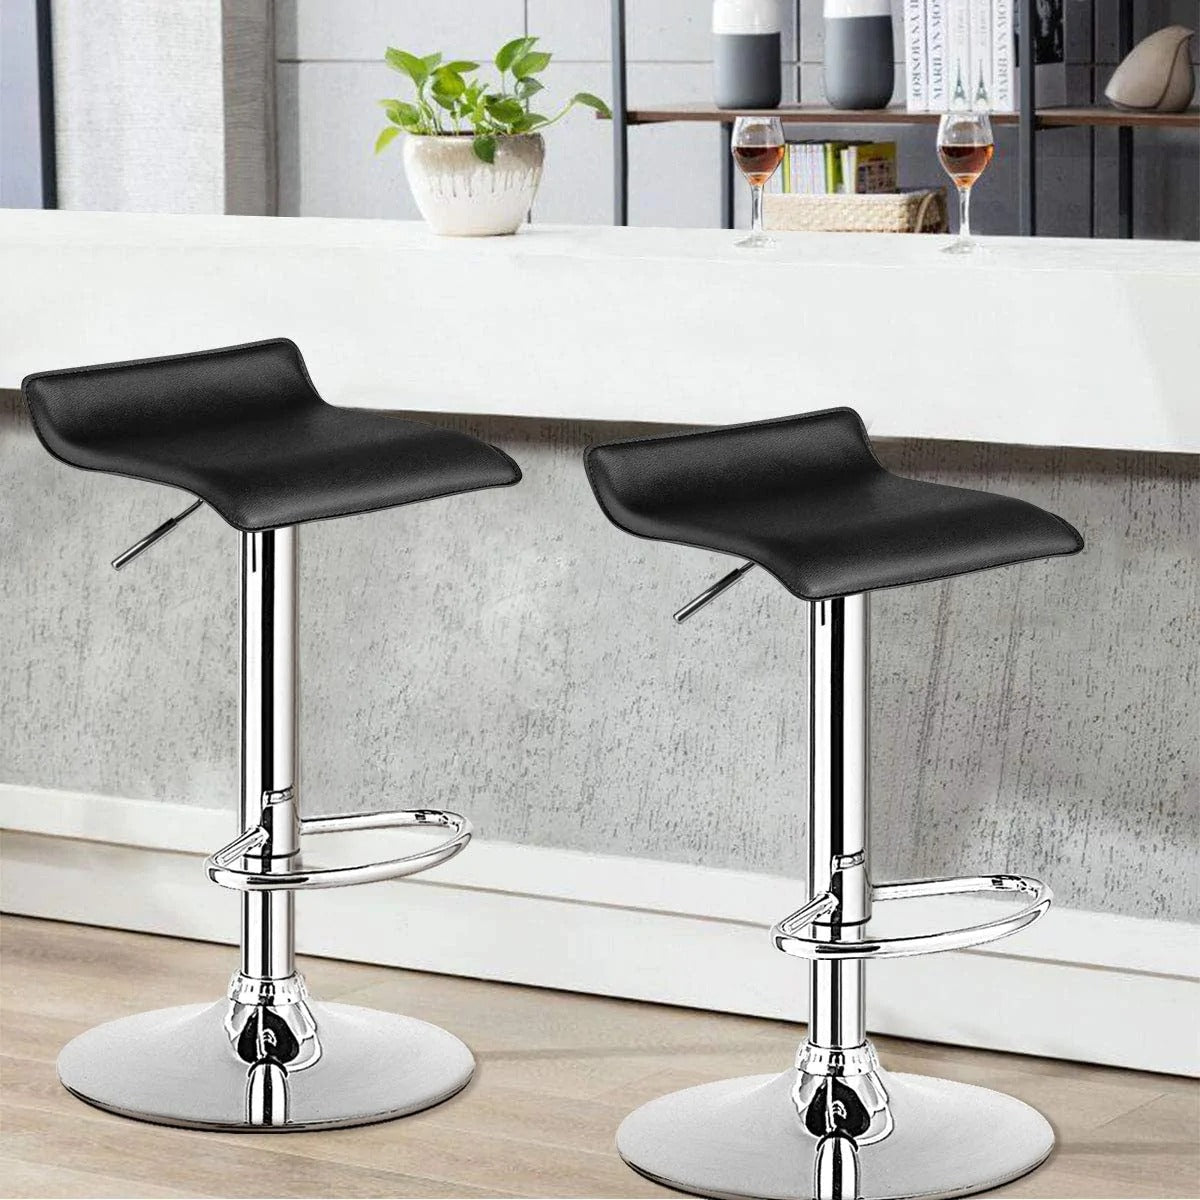 Bar Chairs, Bar Stools, Kitchen Stools, Kitchen Bar Stools, Wooden Bar Stools, Bar Stool Chairs, Counter Chairs, Bar Stools Online, Kitchen Bar Chairs, Bar Chair Price, Bar Chairs For Home, Bar Chairs Wooden, Breakfast Counter Chairs